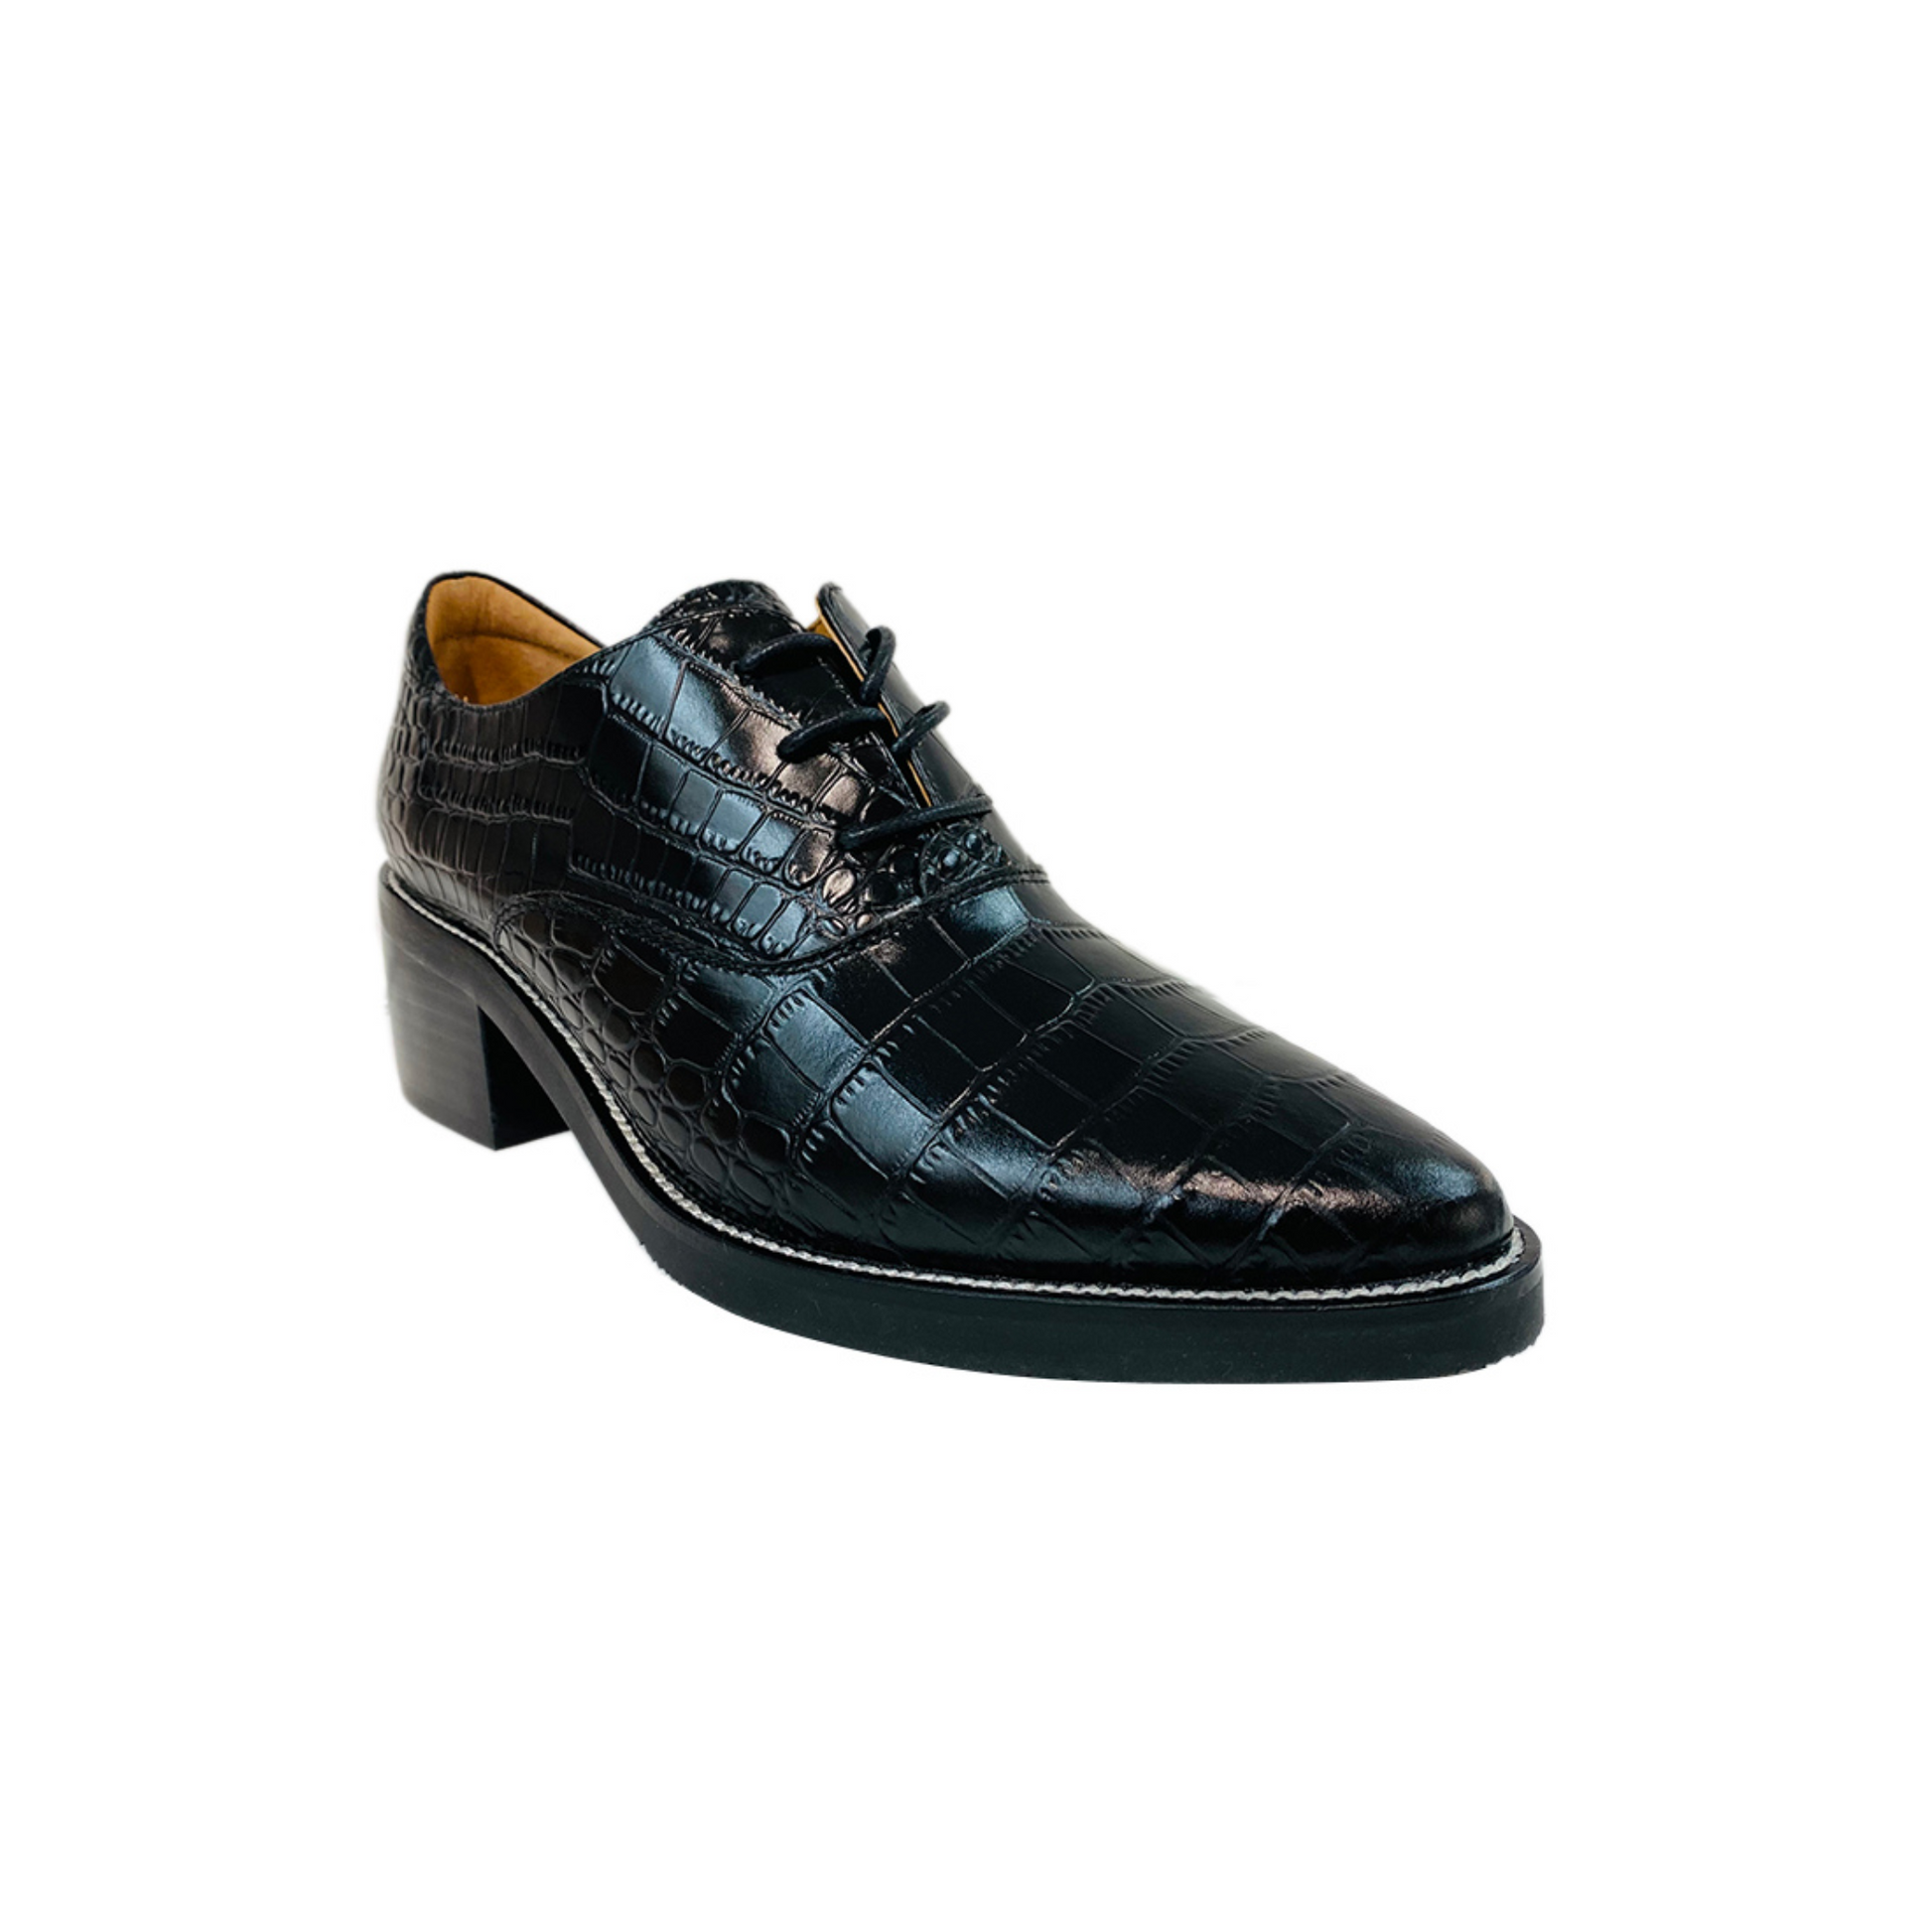 Front angled profile of the Bresley Praise Shoe in the colour Black.